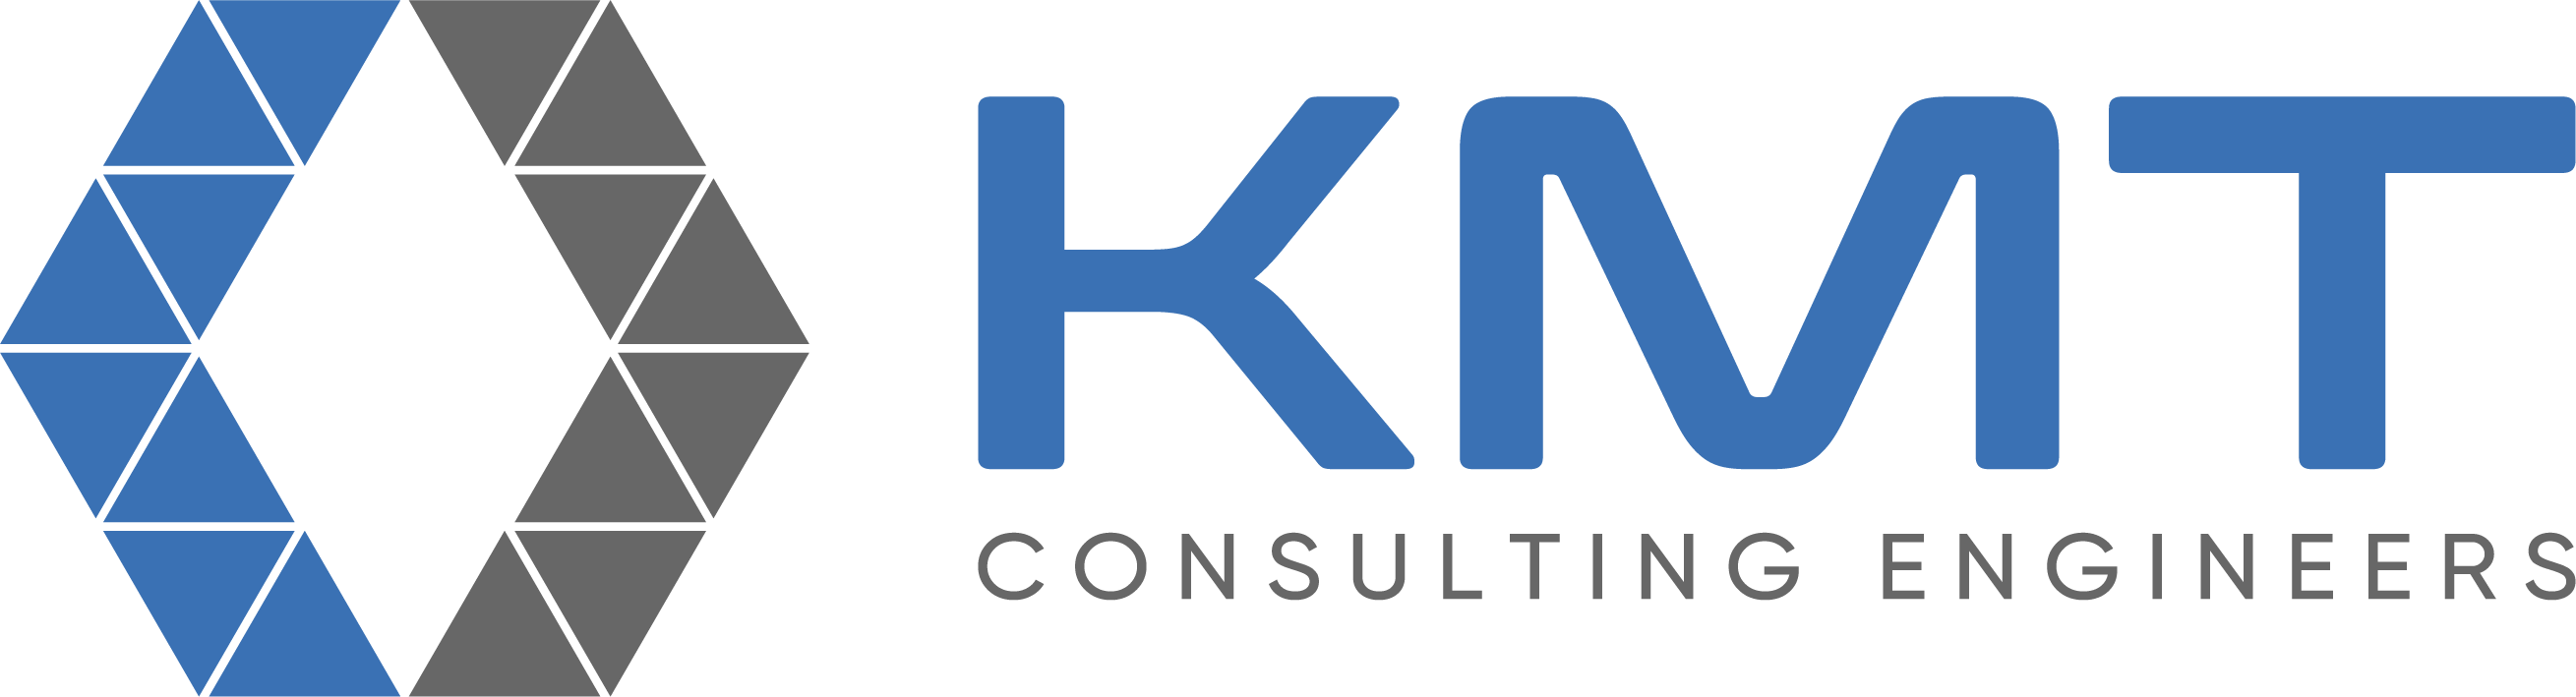 KMT CONSULTING ENGINEERS Sp. z o.o. sp. k.